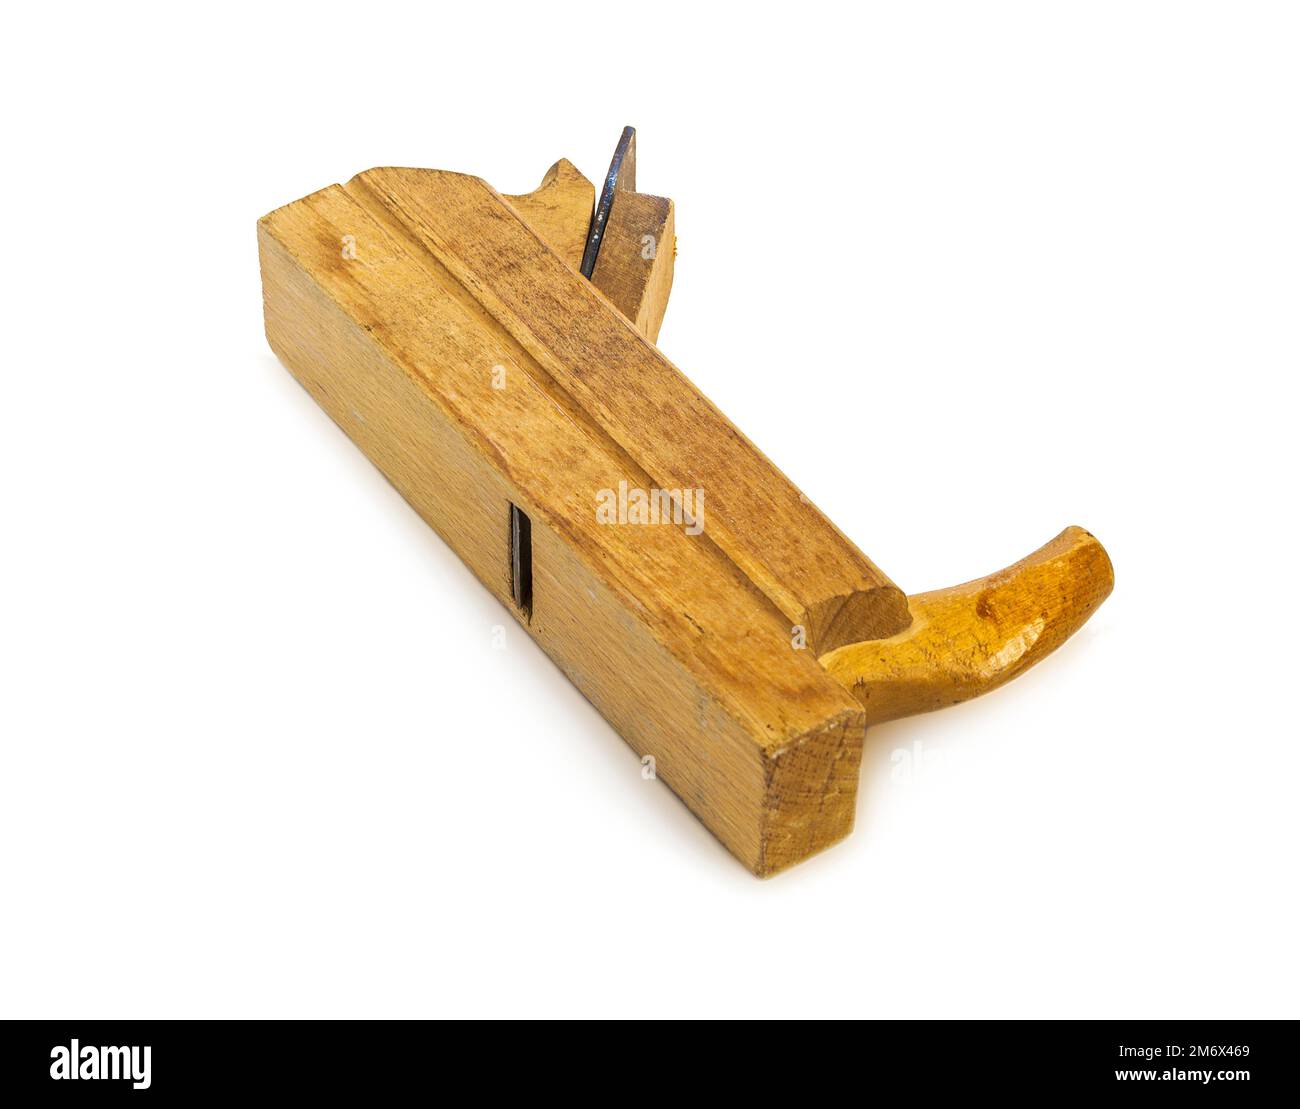 Joiner's tool. Planer for wood treatment, white background Stock Photo